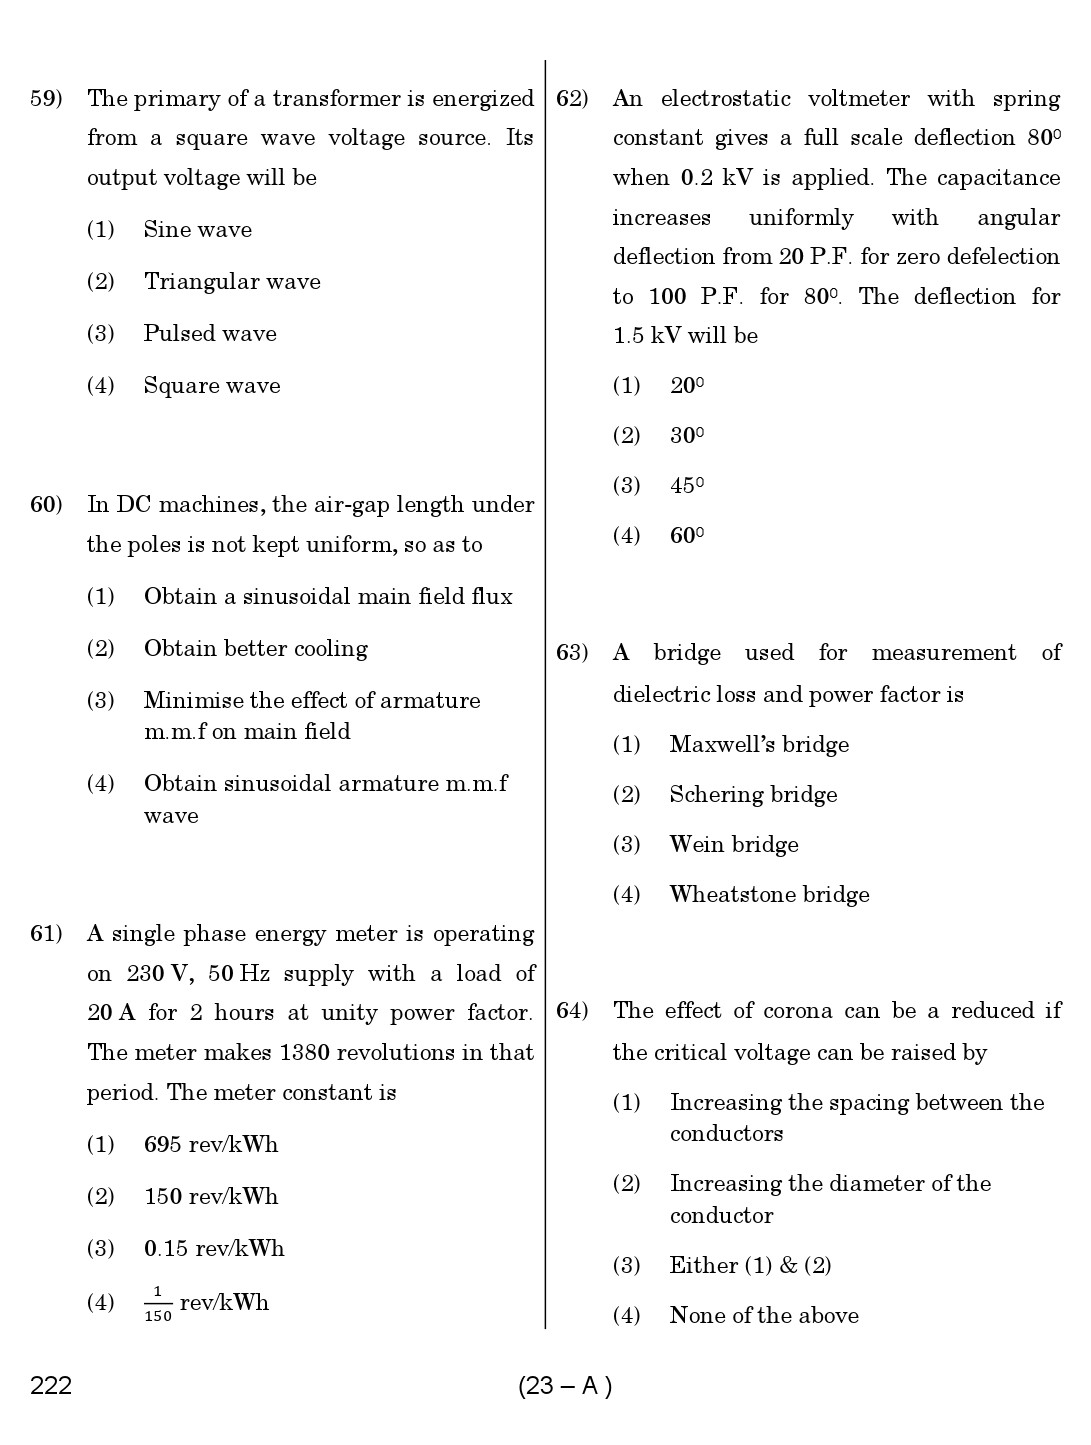 Karnataka PSC Assistant Engineer Electrical Exam Sample Question Paper 23